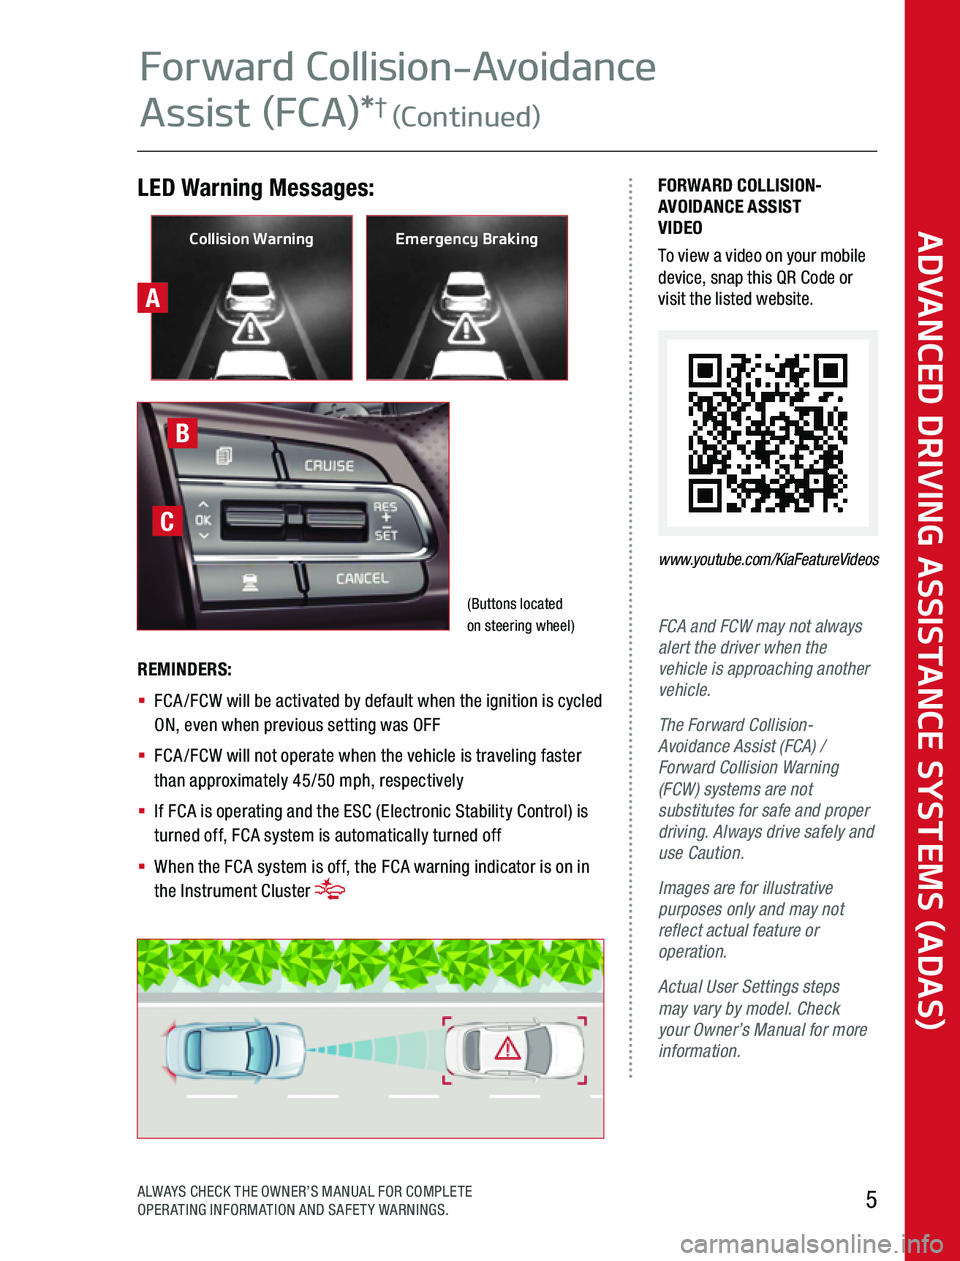 KIA TELLURIDE 2020  Advanced Driving Assistance System A
LED Warning Messages:FORWARD COLLISION-AVOIDANCE ASSIST VIDEOTo view a video on your mobile device, snap this QR Code or visit the listed website 
www.youtube.com/KiaFeatureVideos
FCA and FCW may no